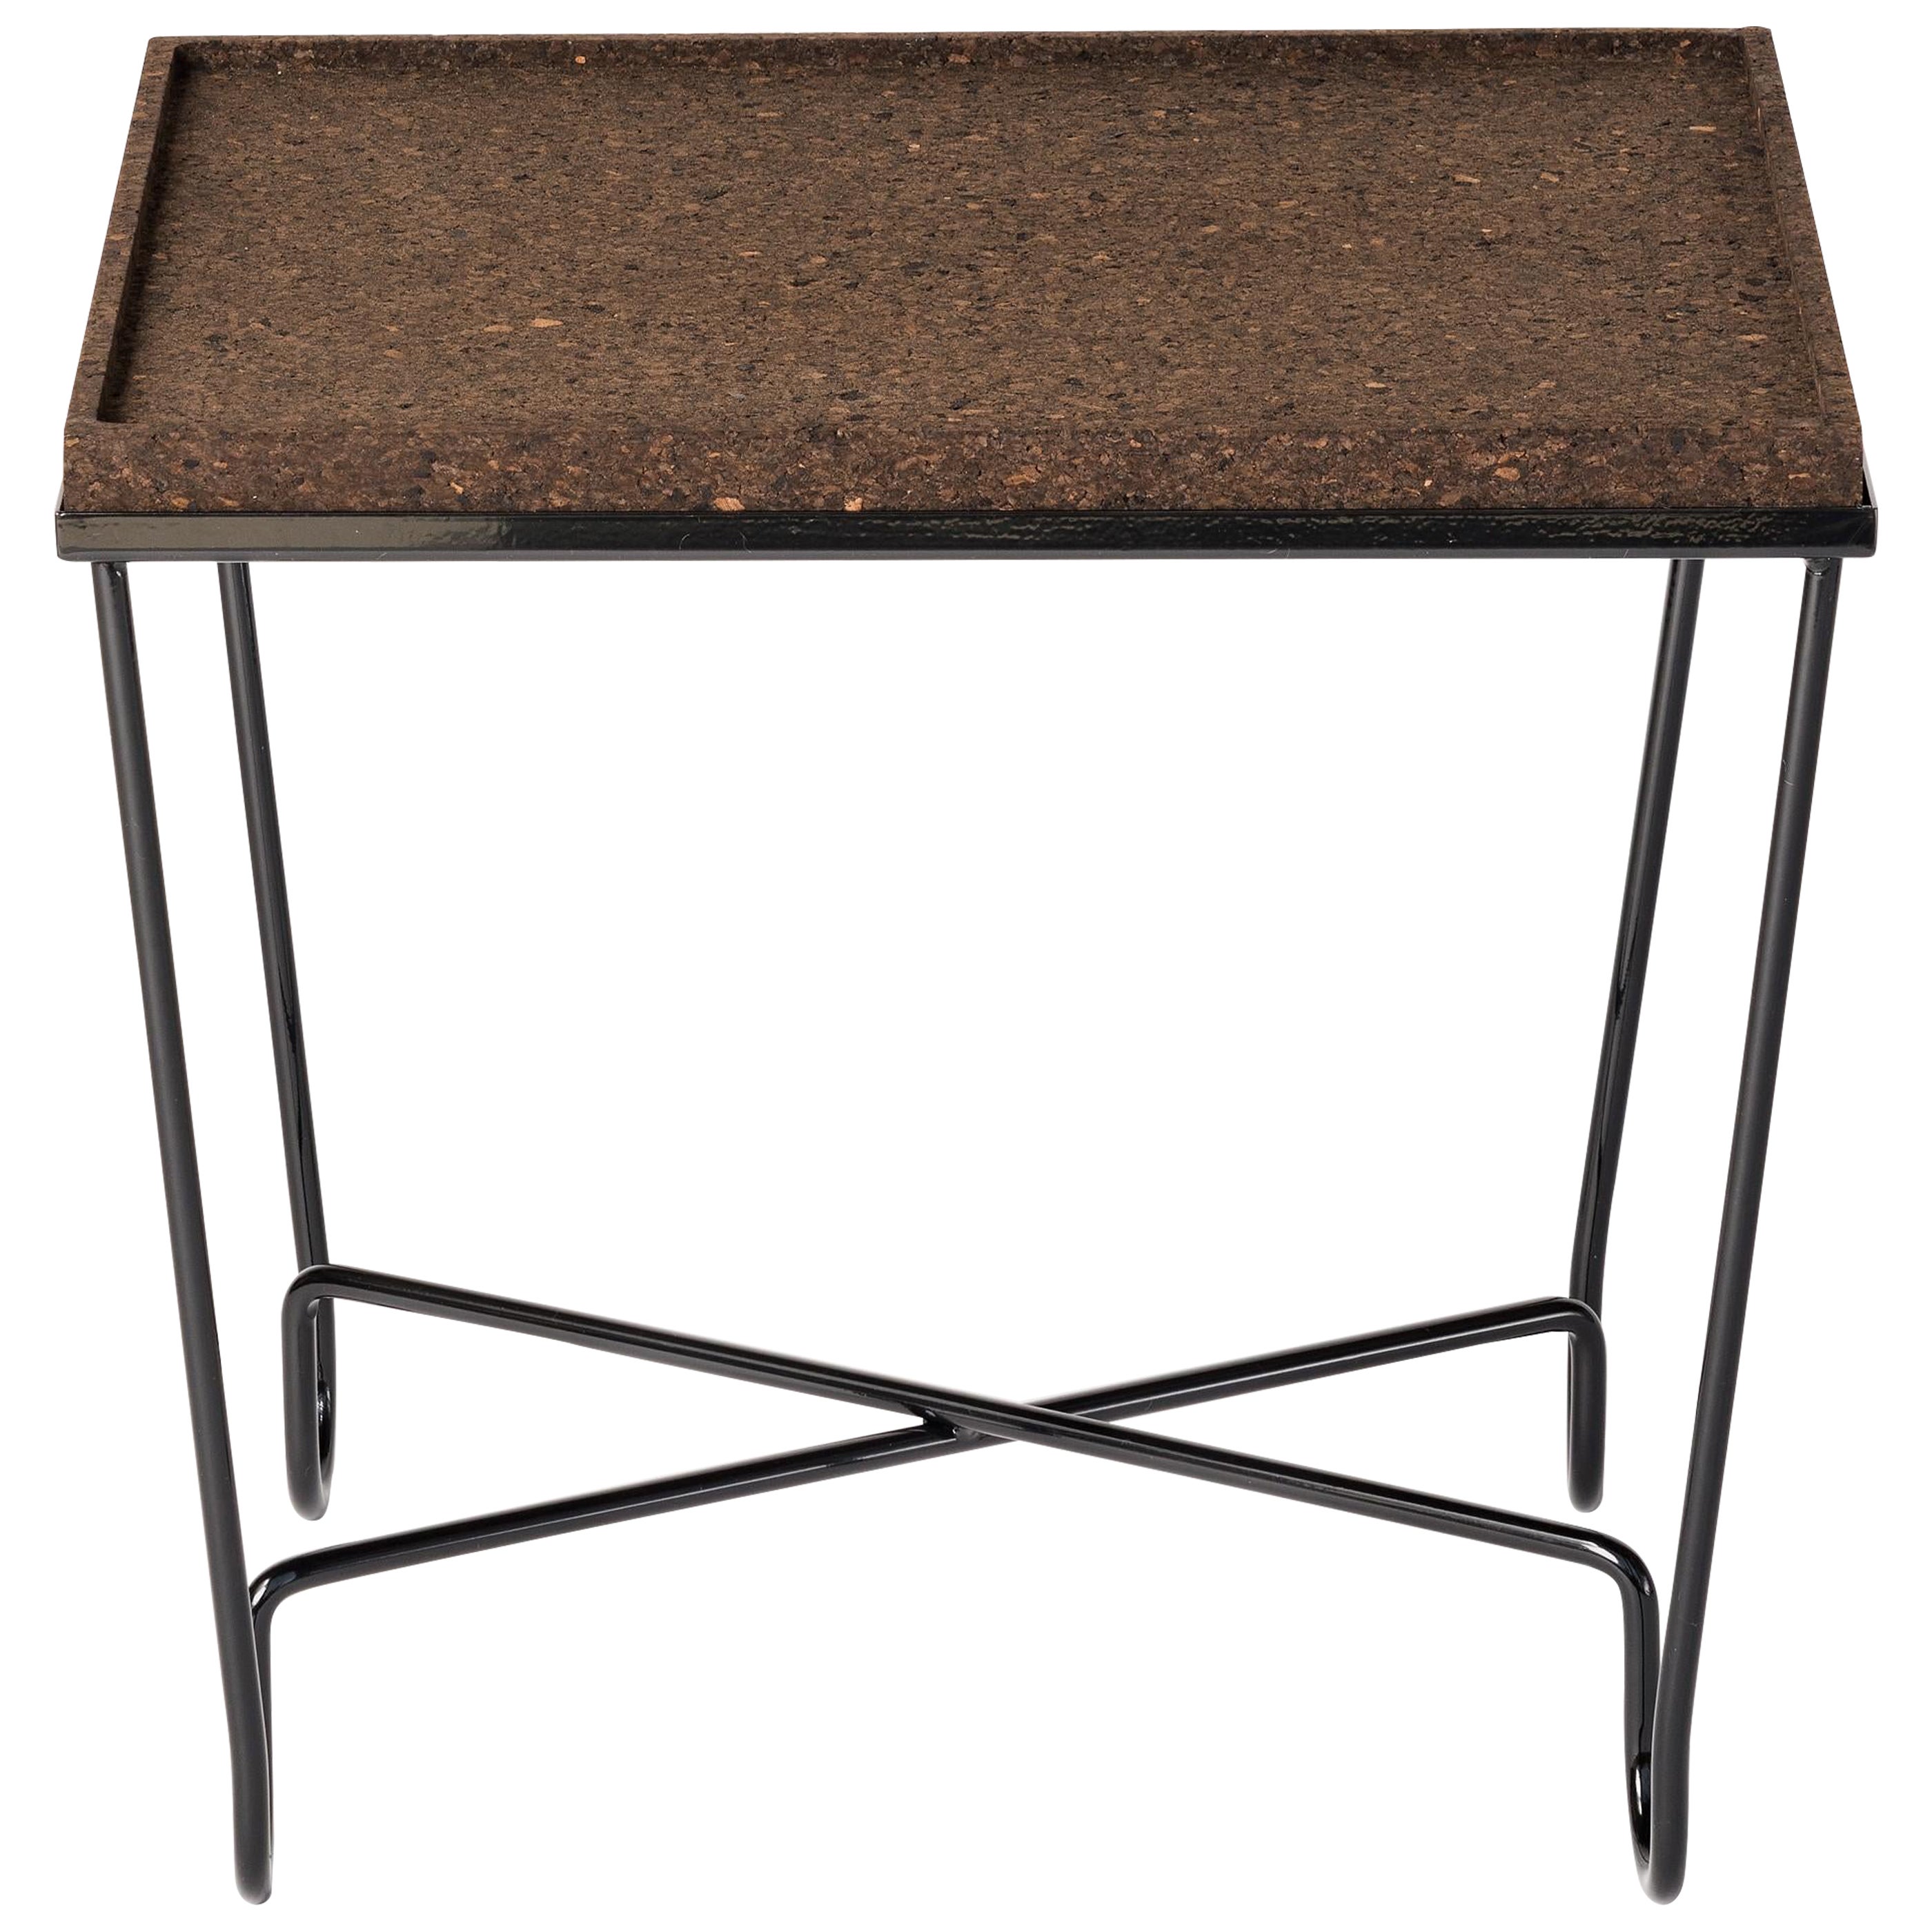 Aronde Black Lacquered Steel Side Table with Burnt or Natural Cork Top  For Sale